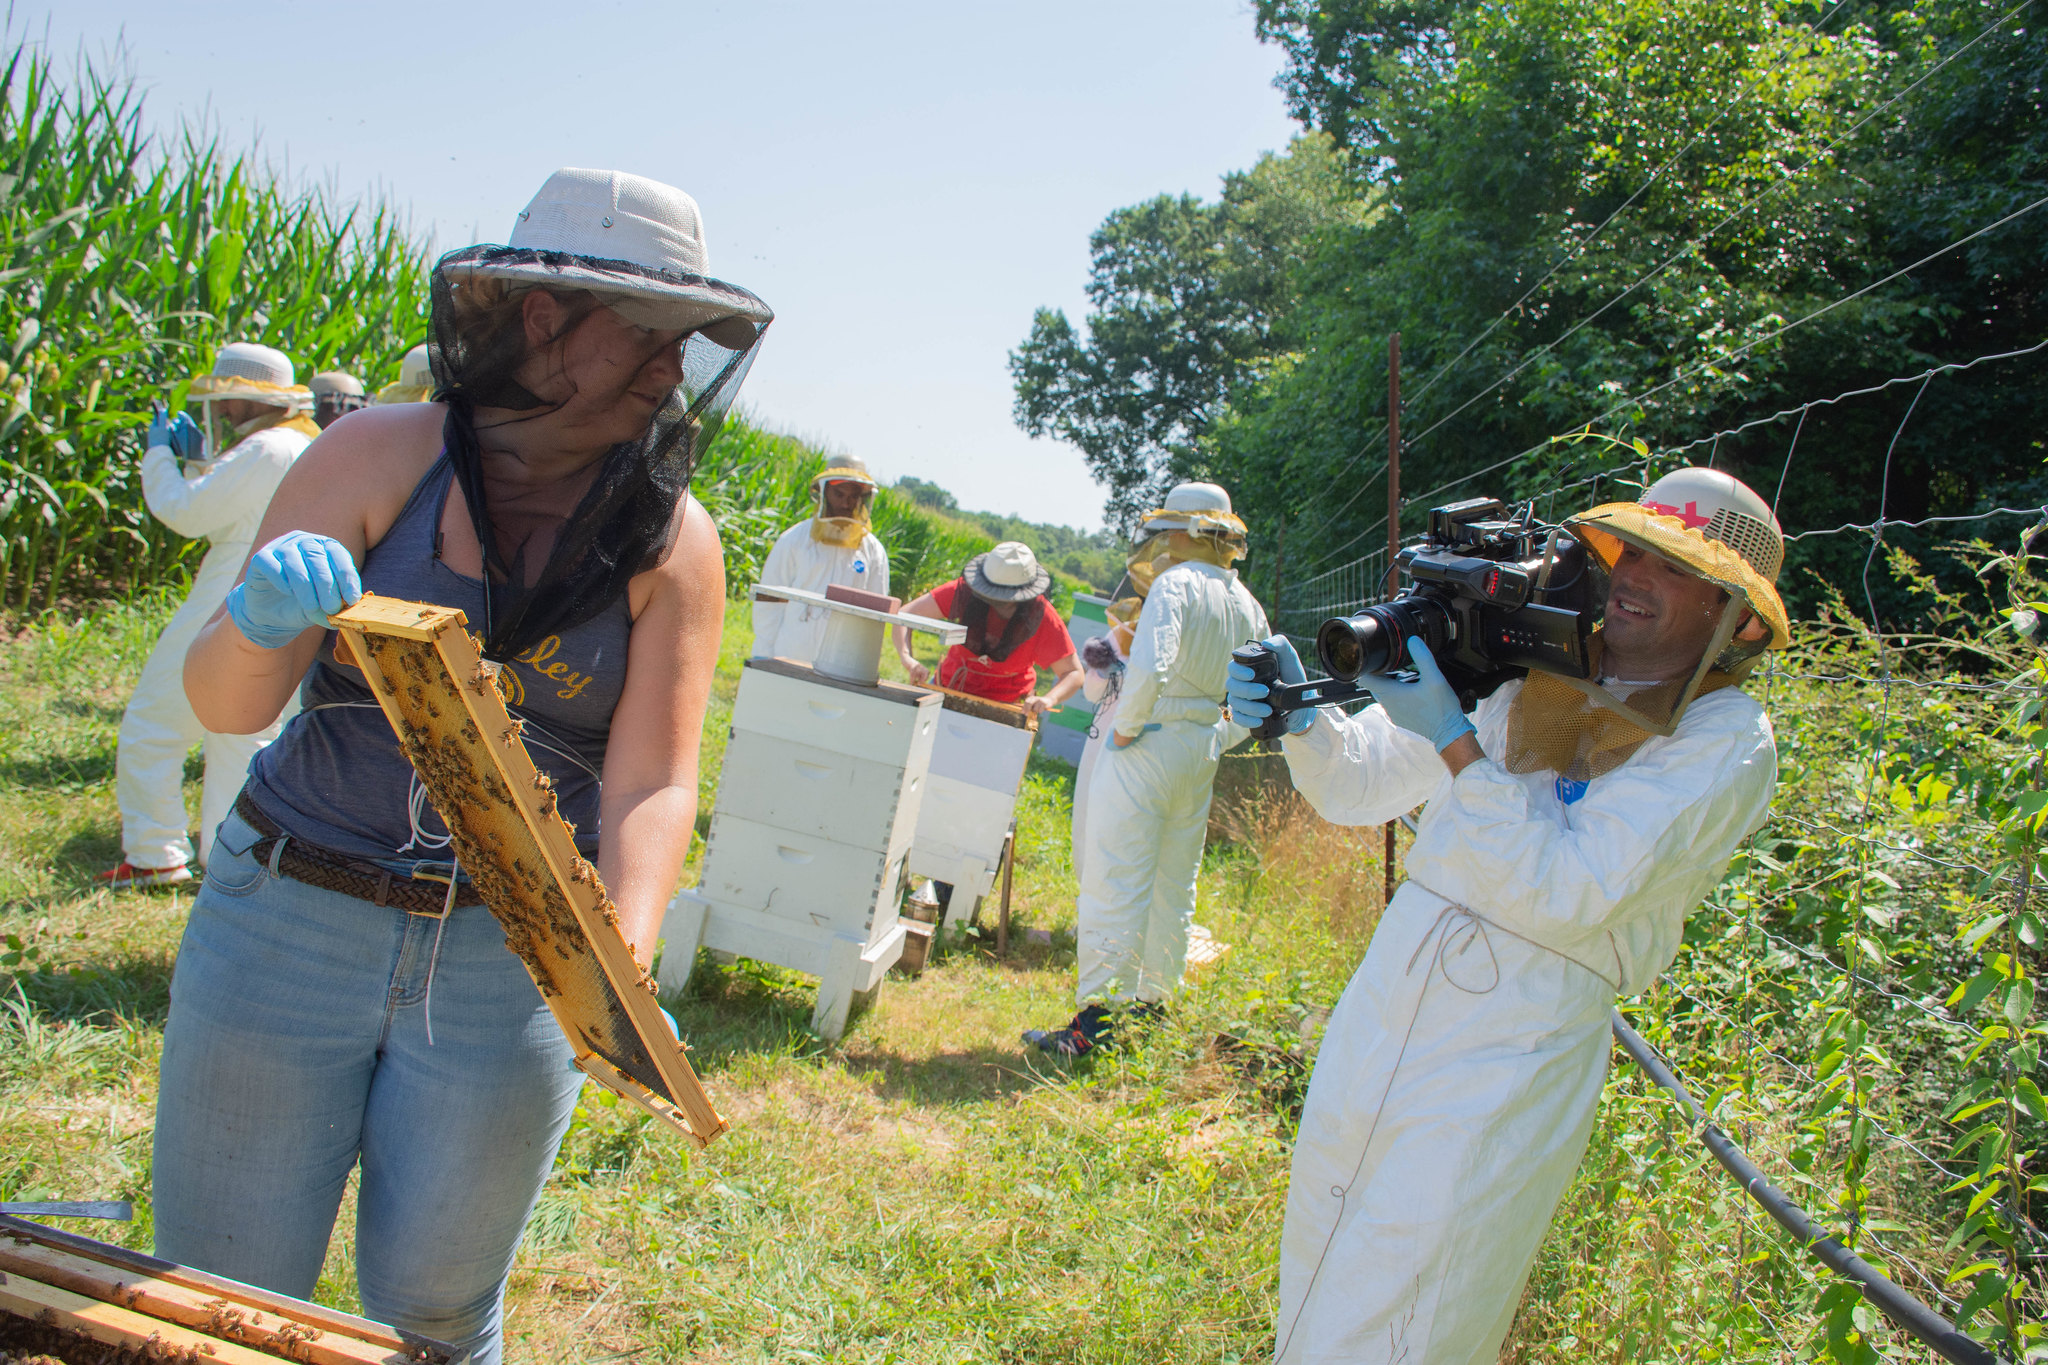 A woman in a beekeeper helmet holds up honeycomb while a man in a bee suit takes video.